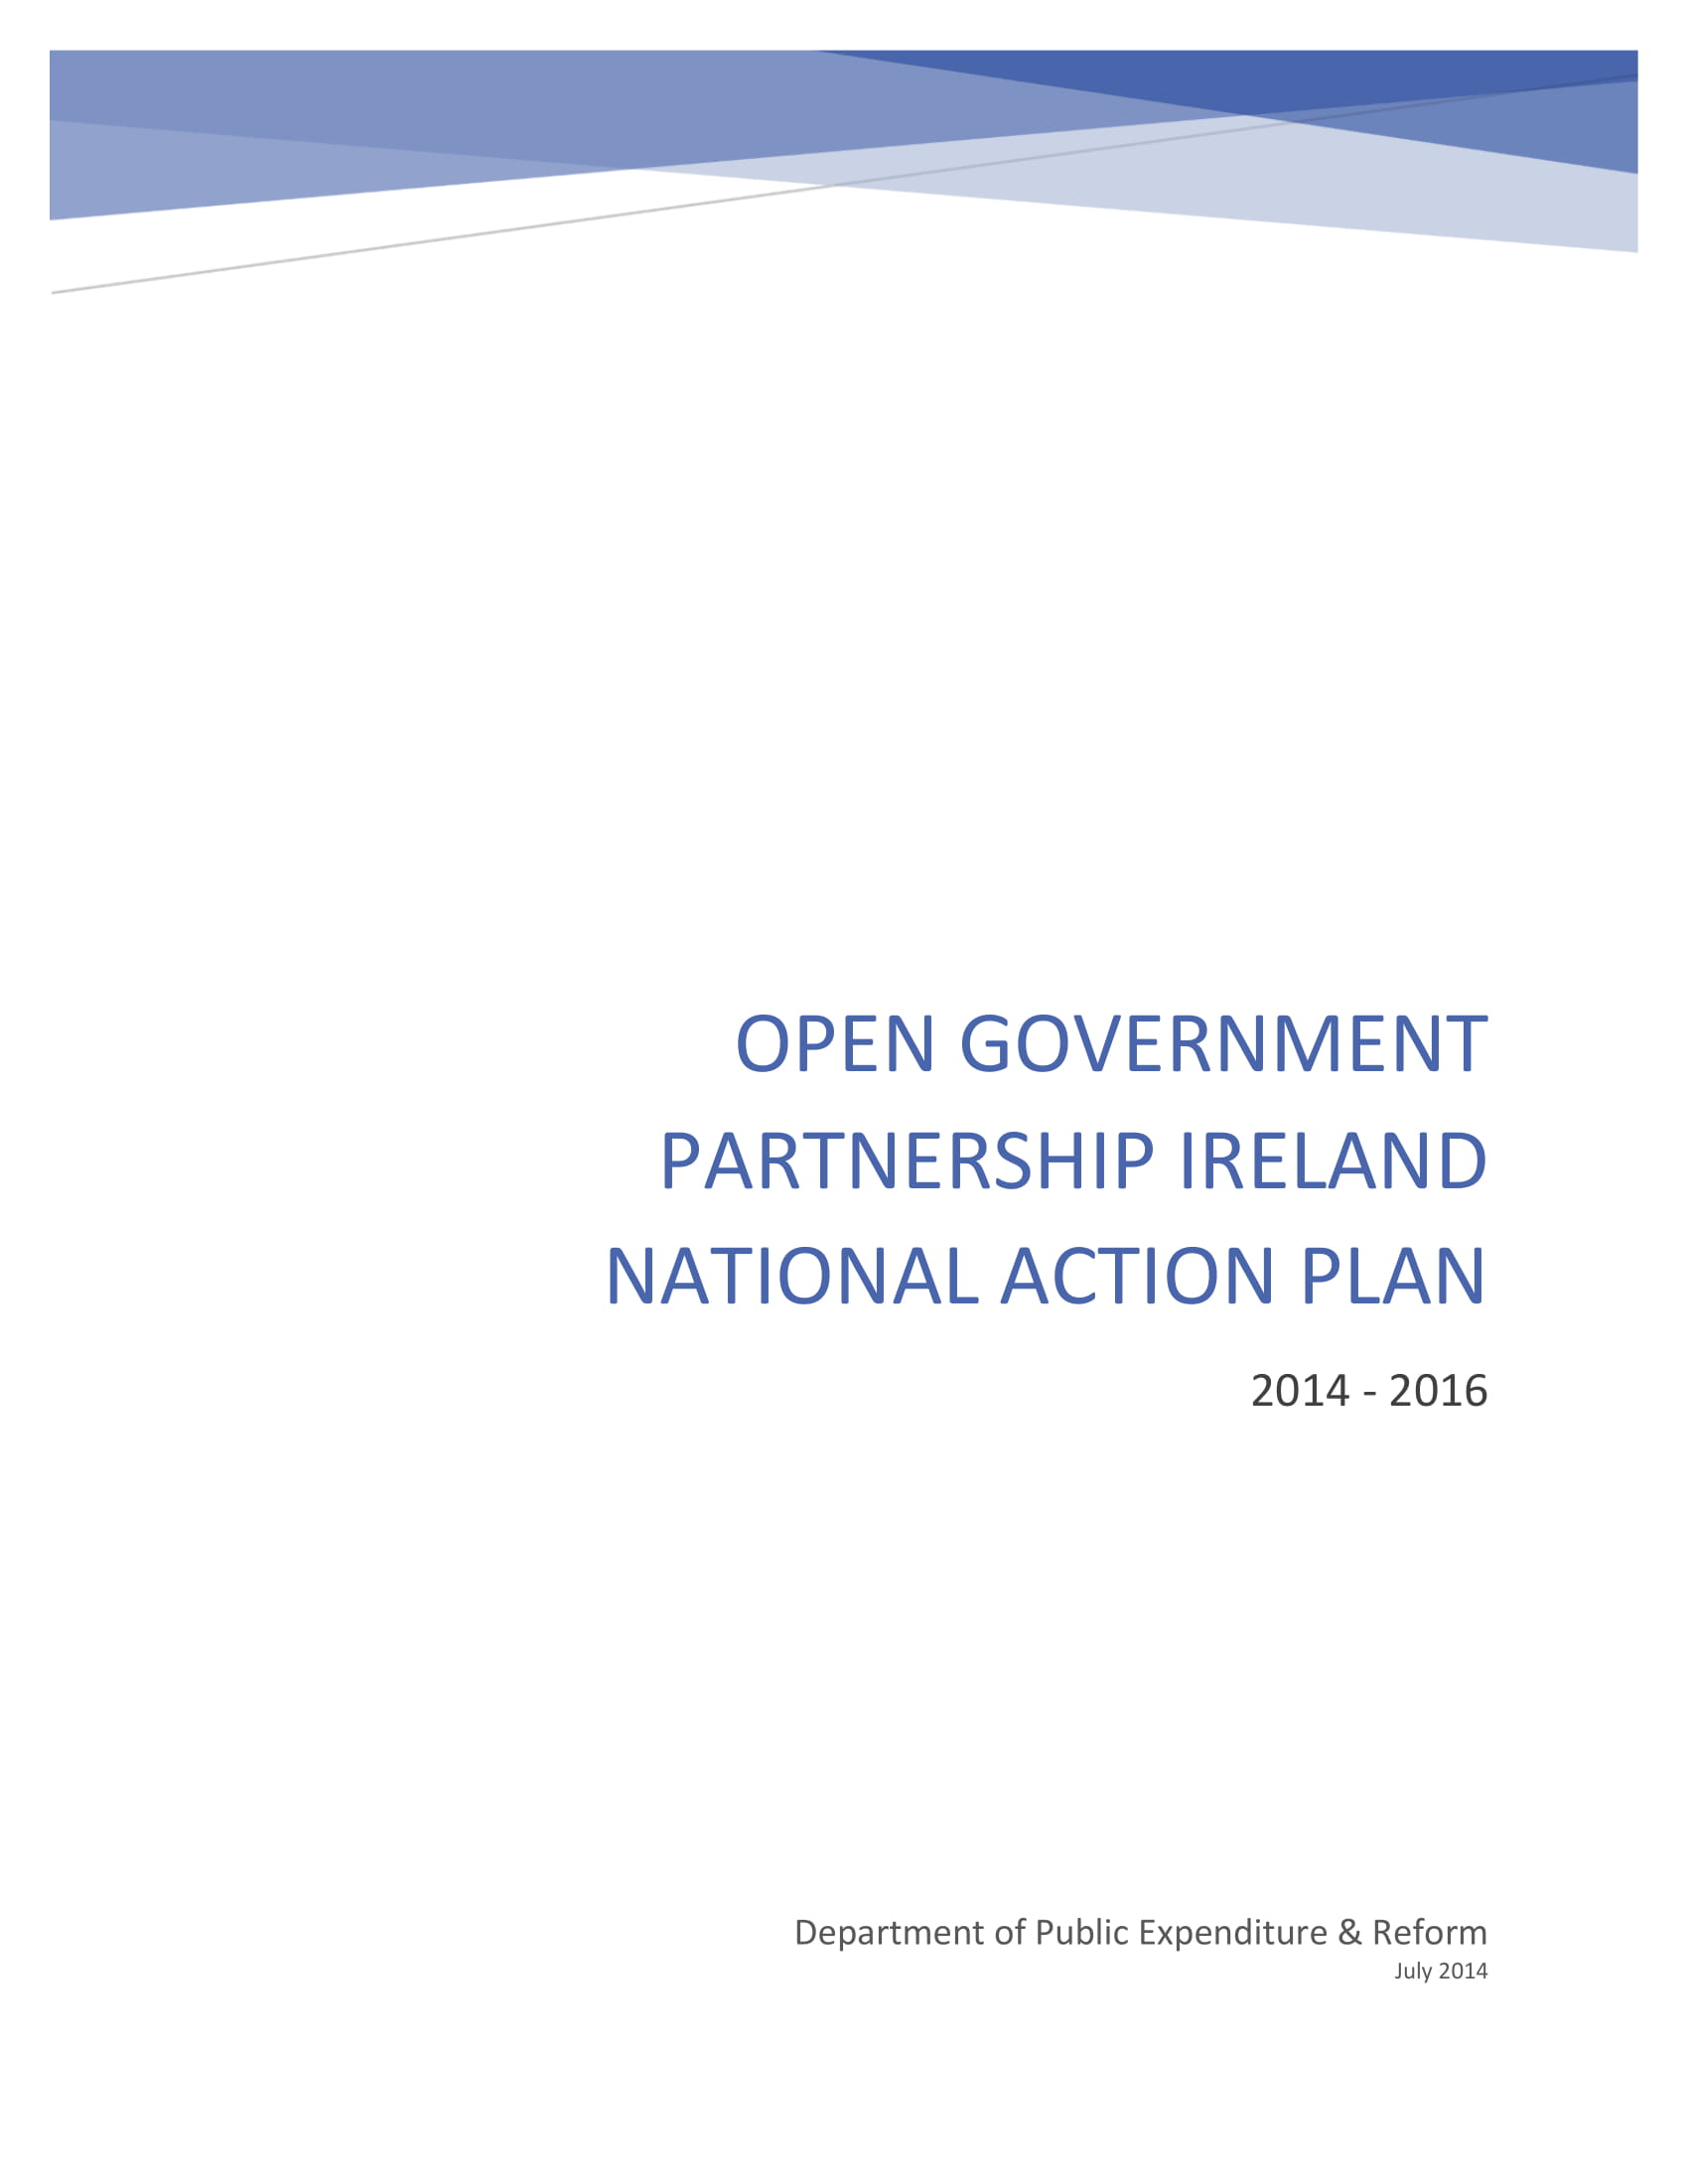 ogp national action plan example